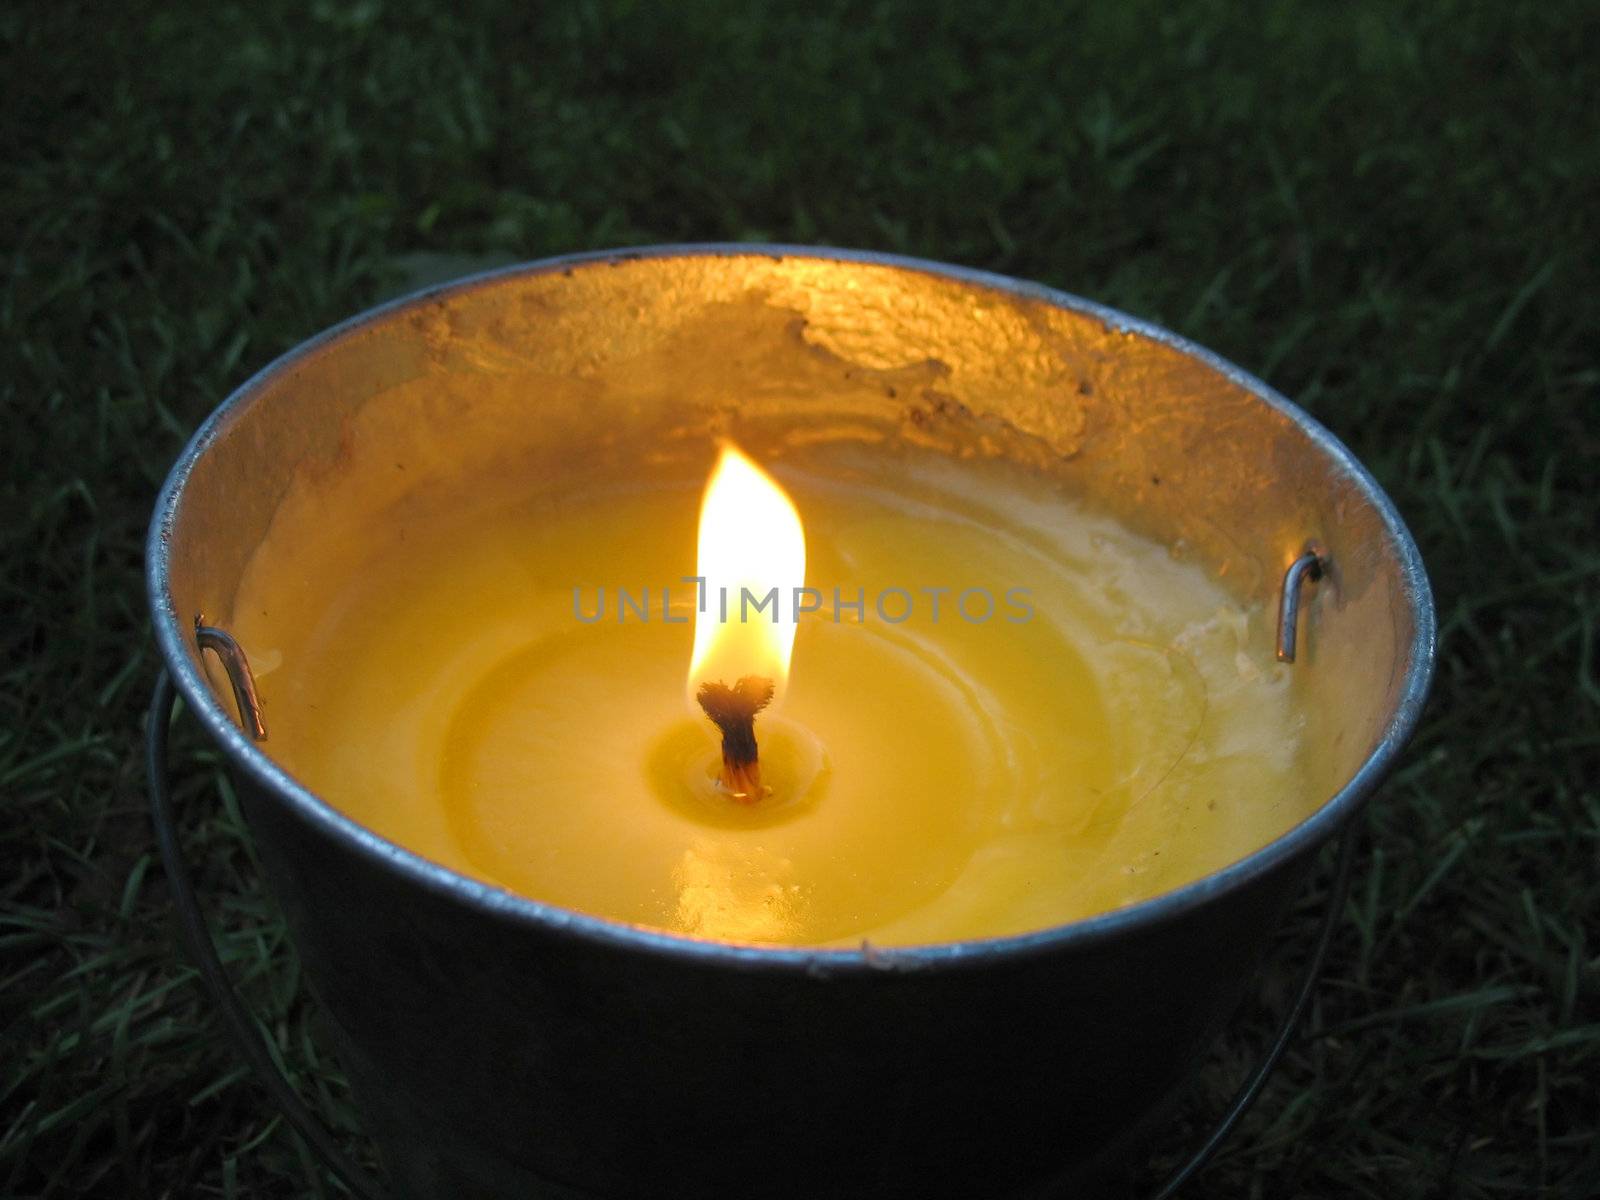 A yellow citronella bucket candle - perfect for those summertime evenings to keep the mosquitos away.